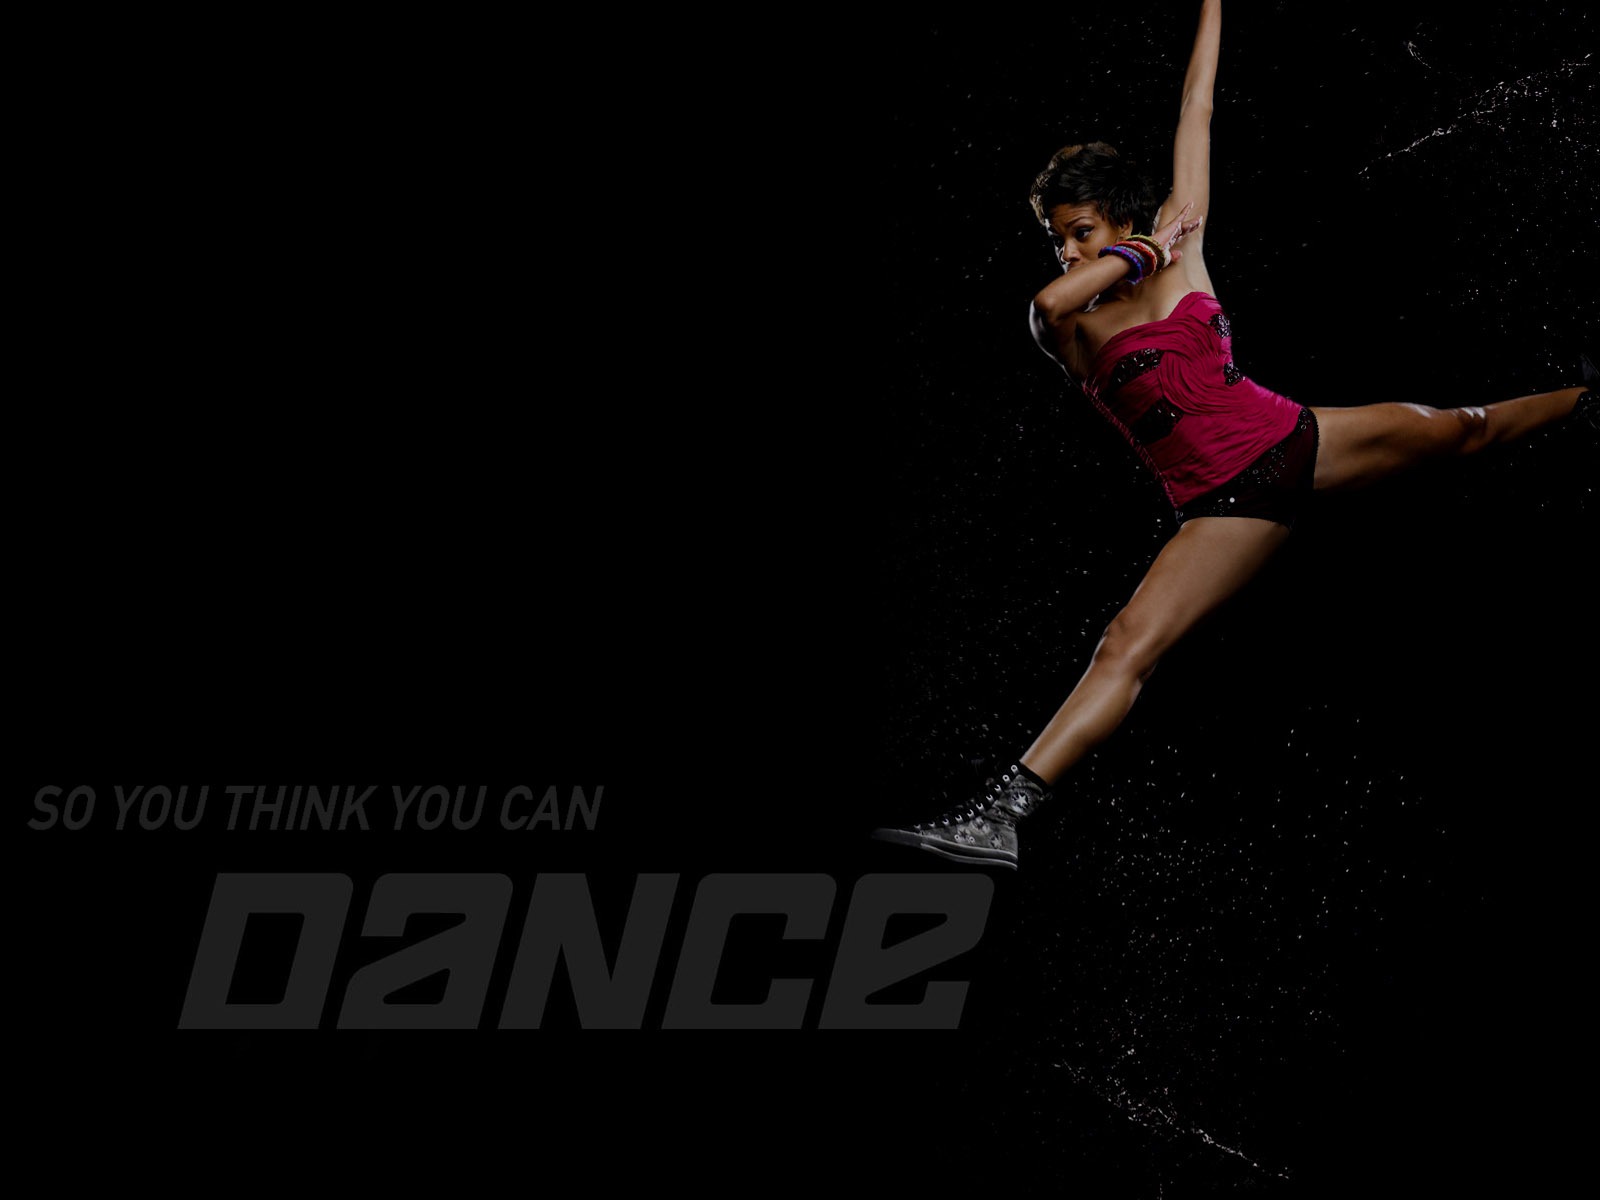 So You Think You Can Dance wallpaper (2) #15 - 1600x1200